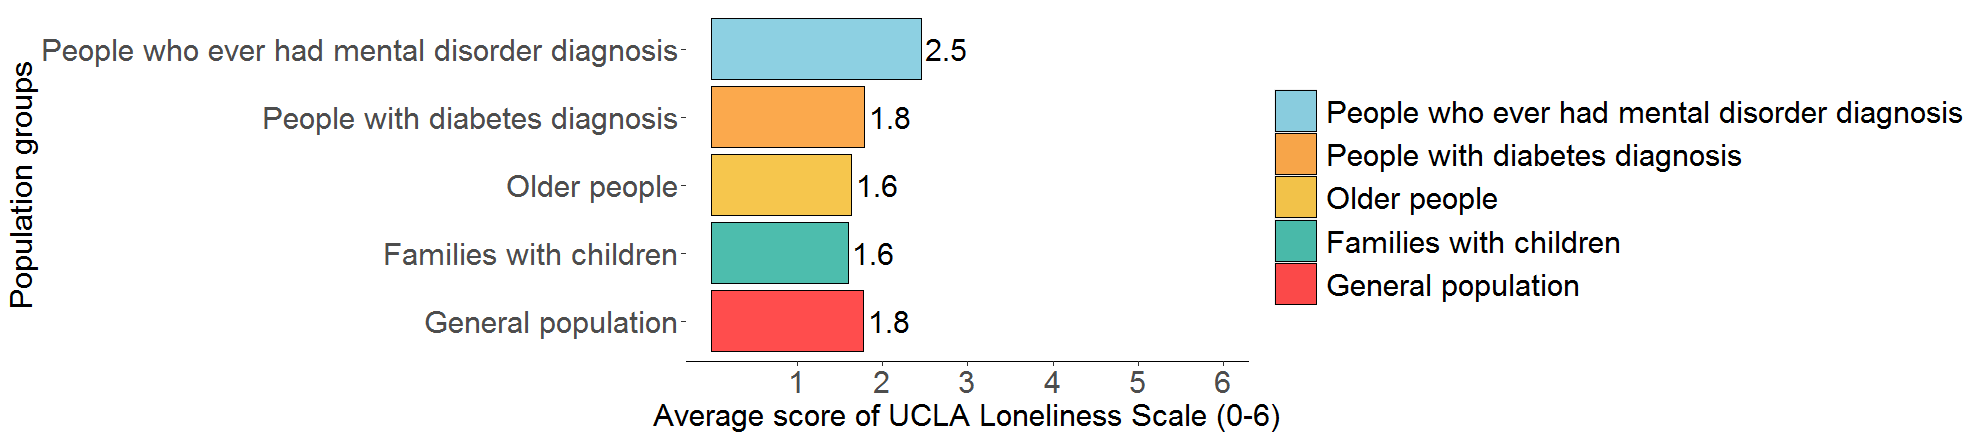 results loneliness